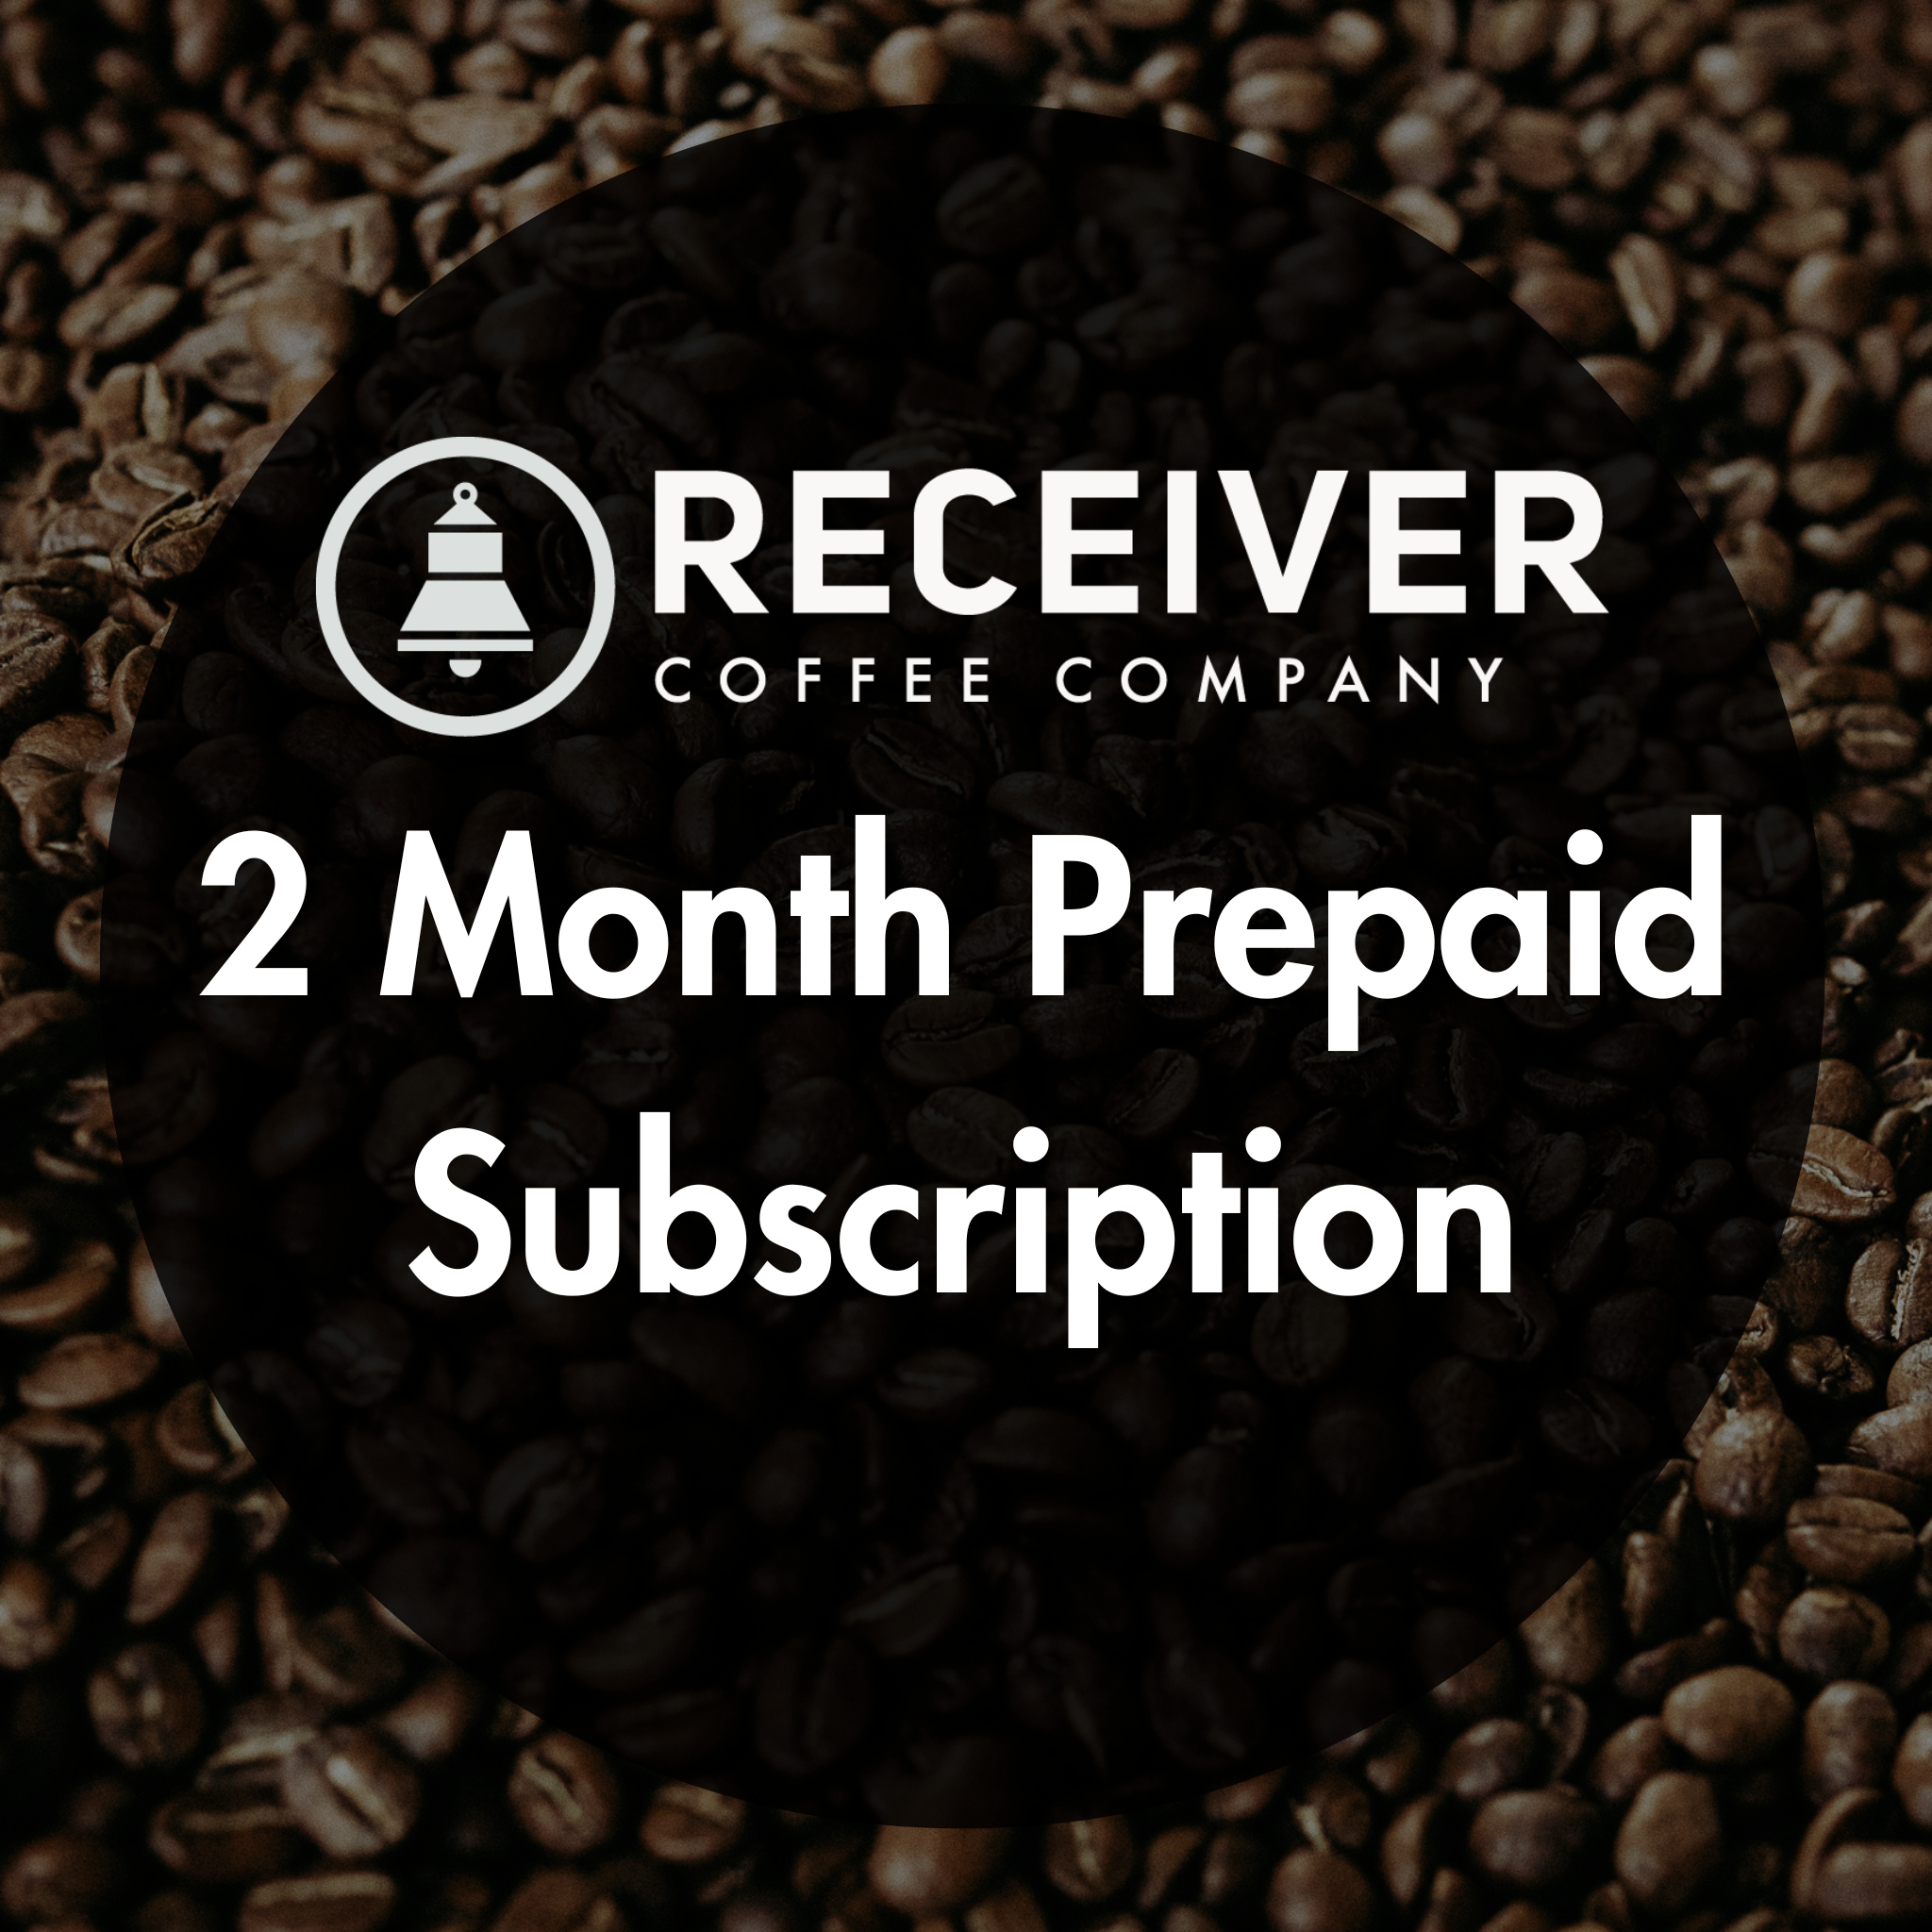 2 Month Prepaid (2 bags monthly) Subscription